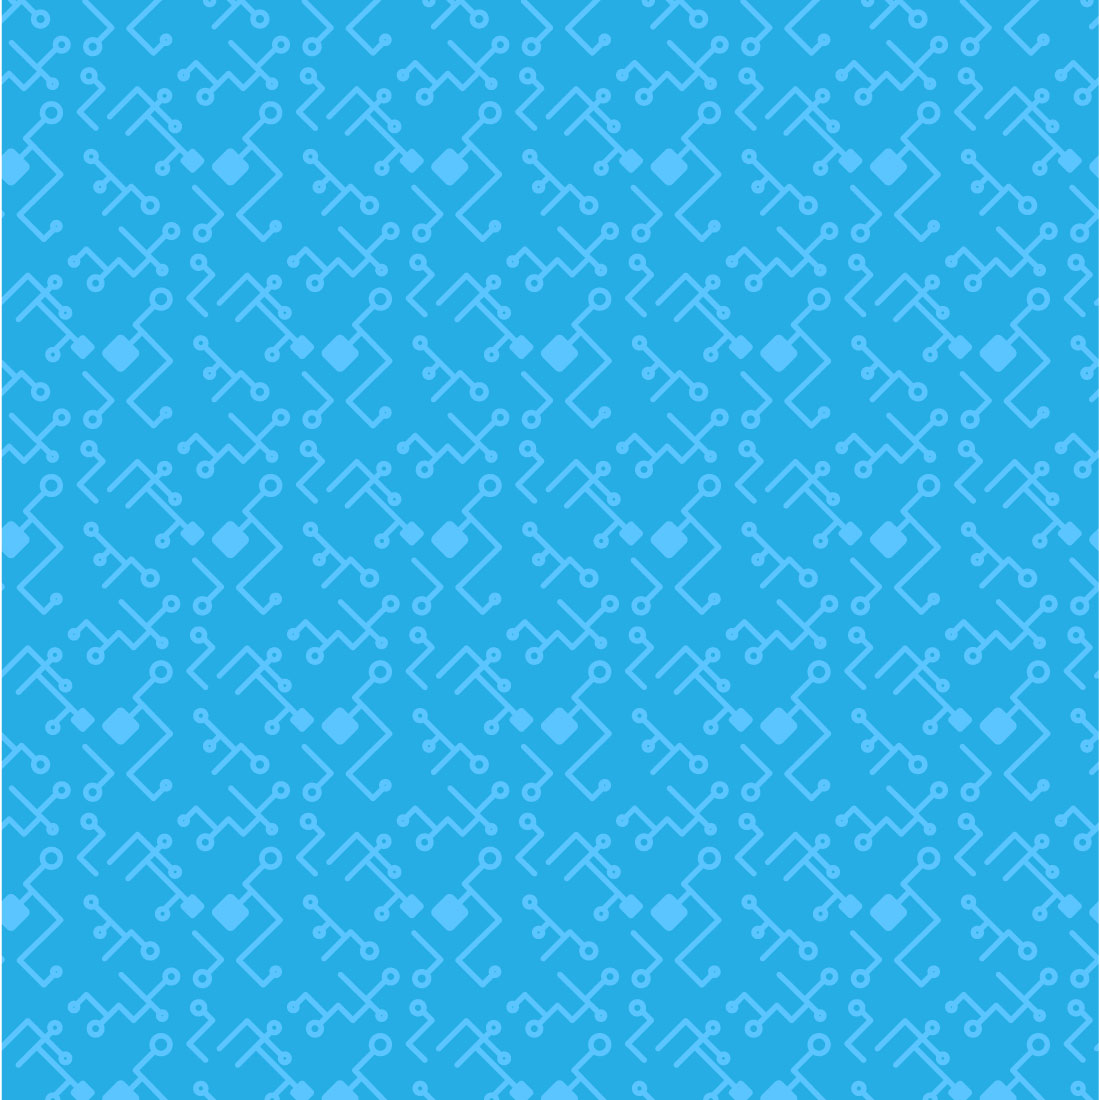 High Tech Seamless Patterns cover image.